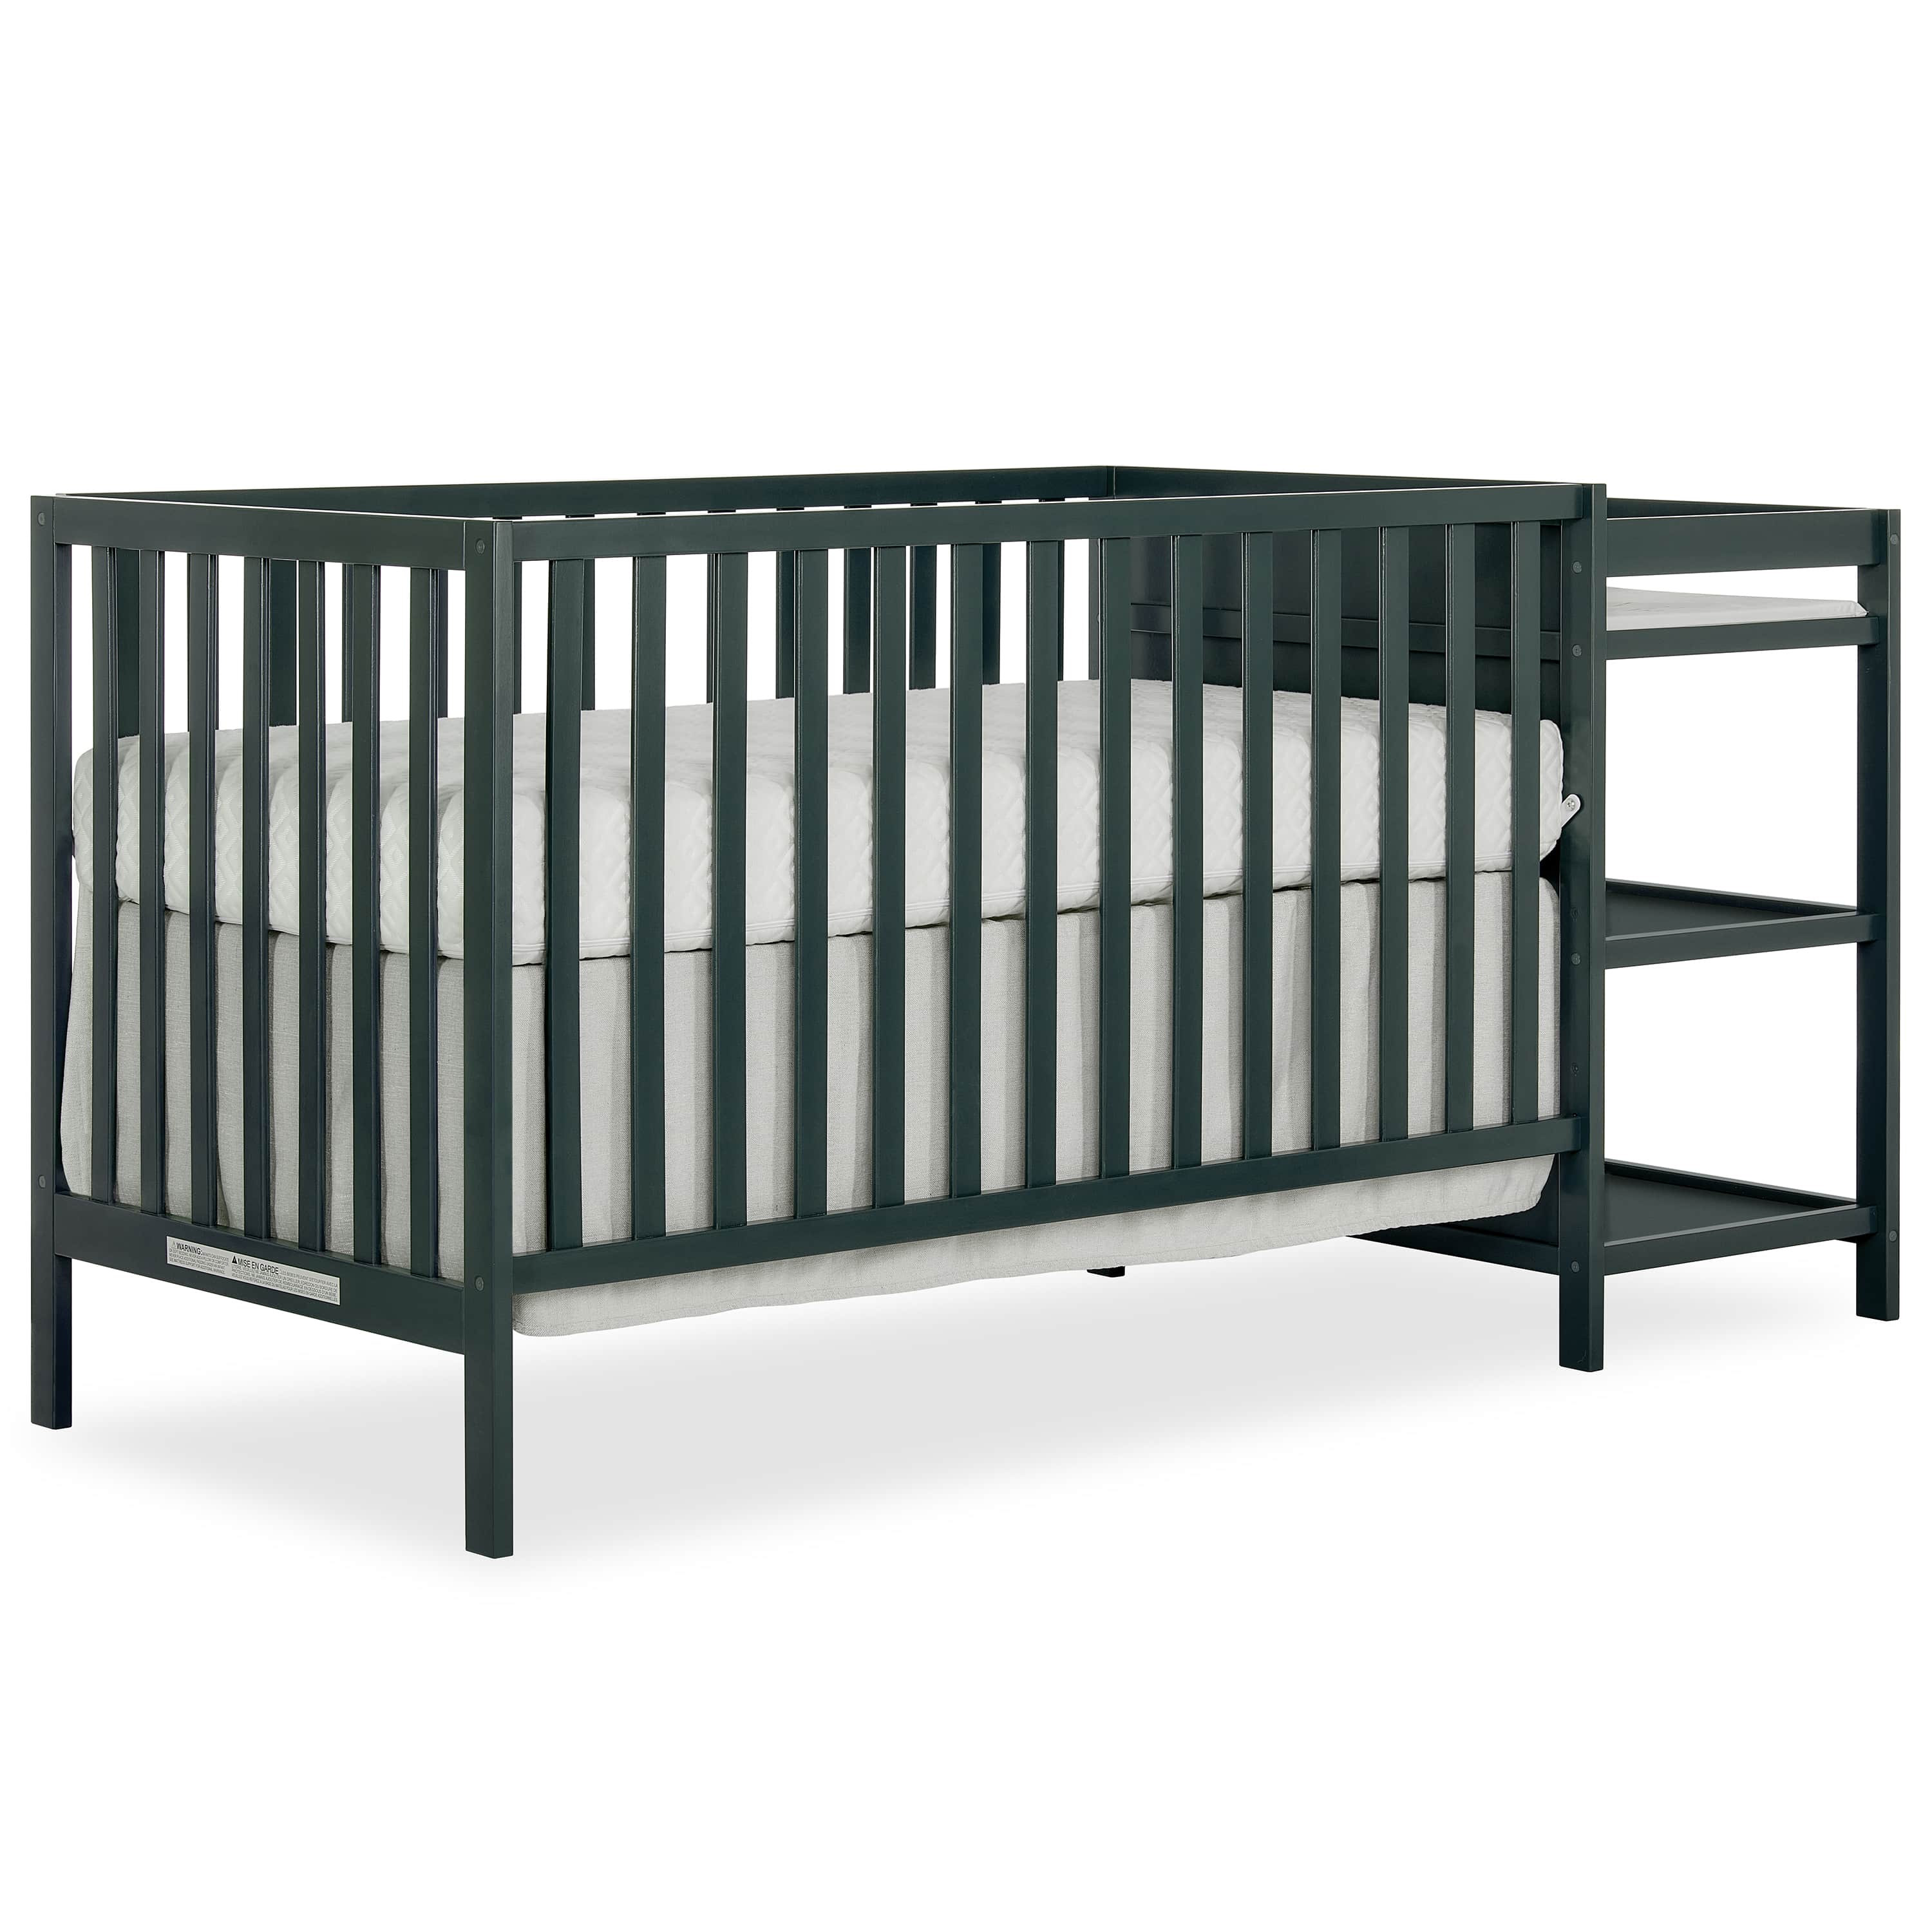 Synergy 5 in 1 Convertible Crib and Changer | Dream On Me